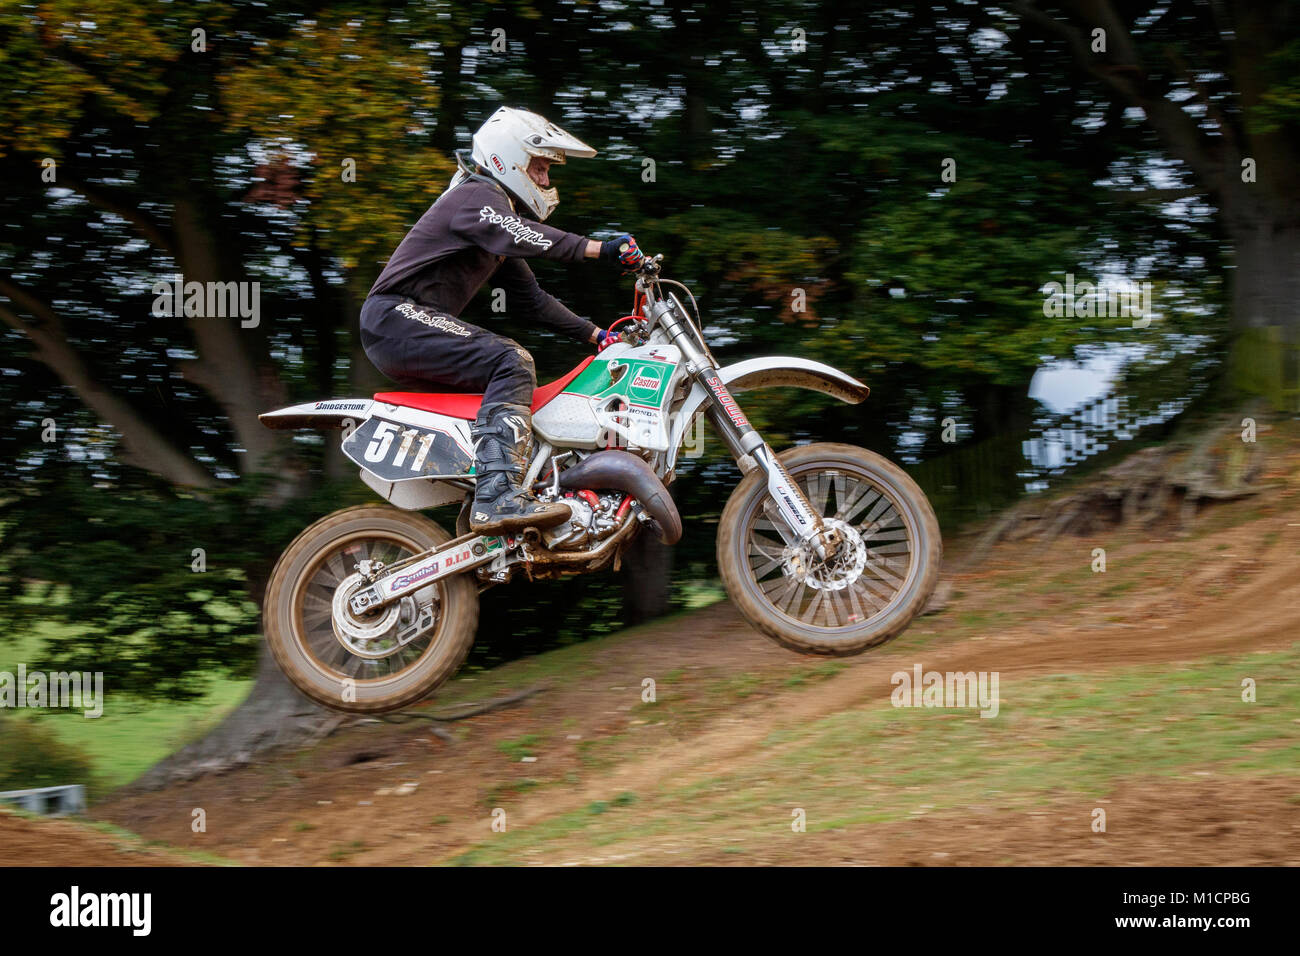 Marcus Smith on the Honda 125 at the NGR & ACU Eastern EVO Motocross Championships, Cadders Hill, Lyng, Norfolk, UK. Stock Photo